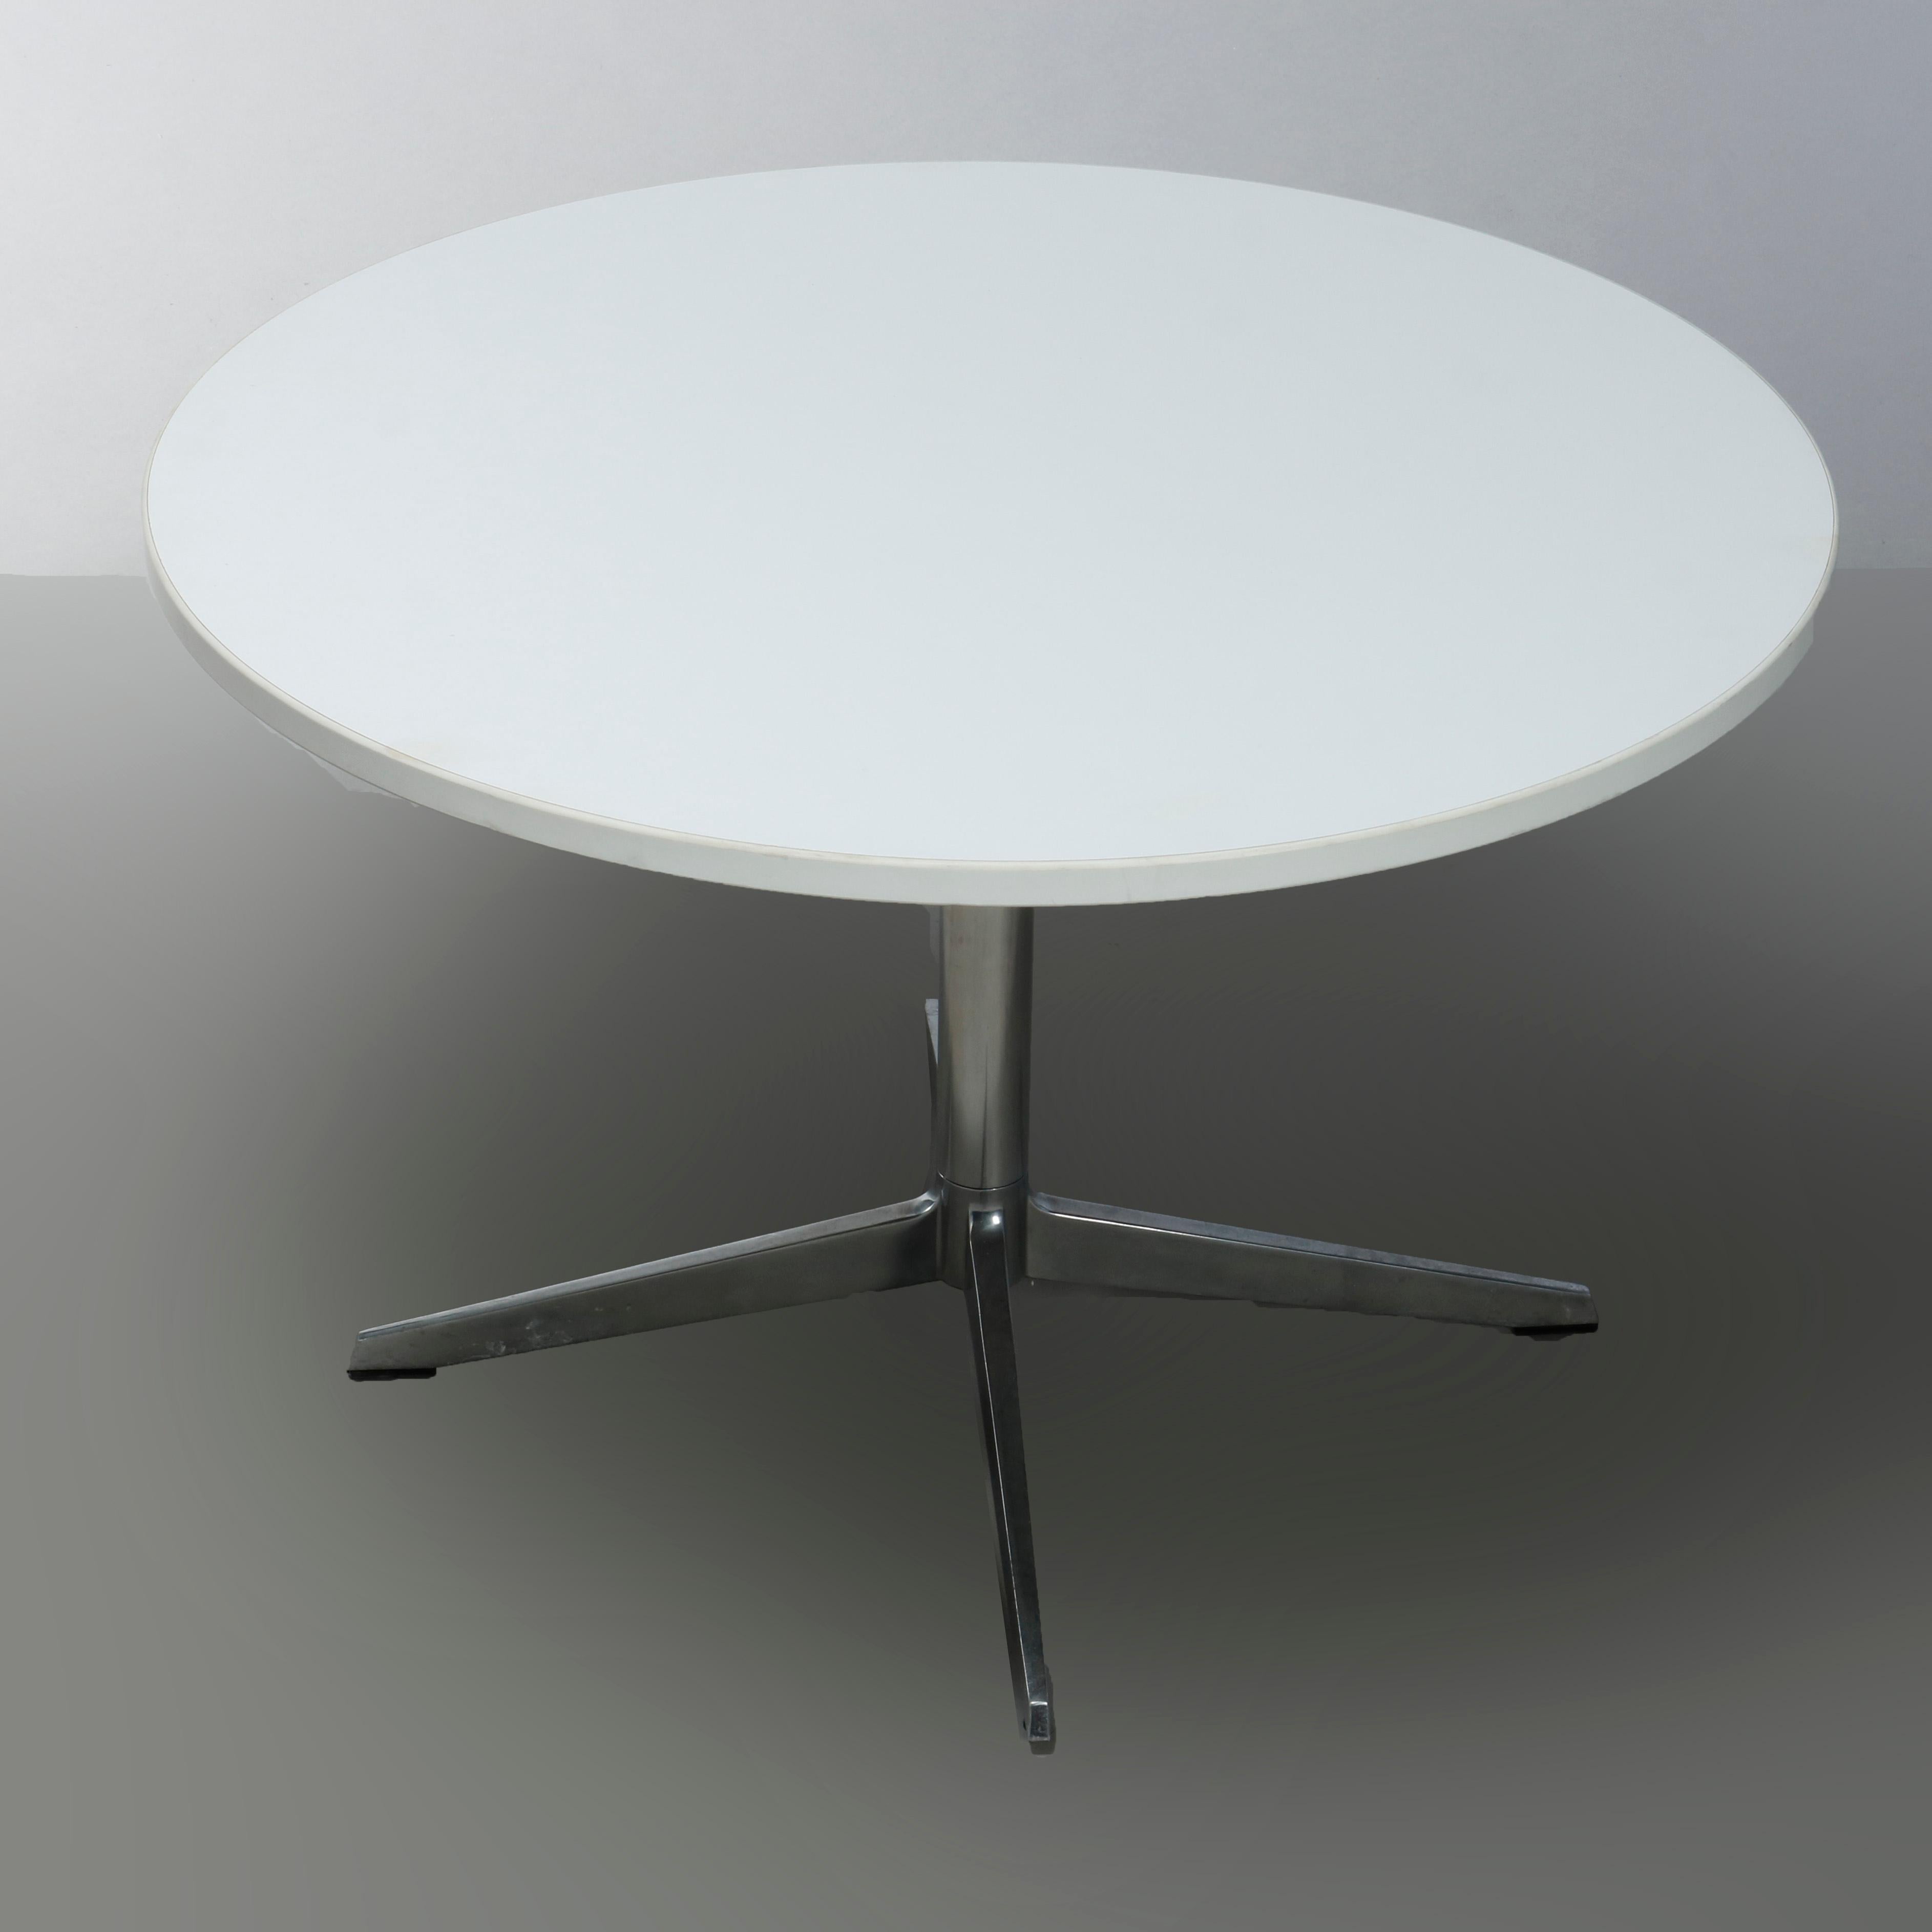 A Mid-Century Modern low table in the manner of Eames for Miller offers round top surmounting chromed steel base with central column having four feet, 20th century

Measures: 20.5